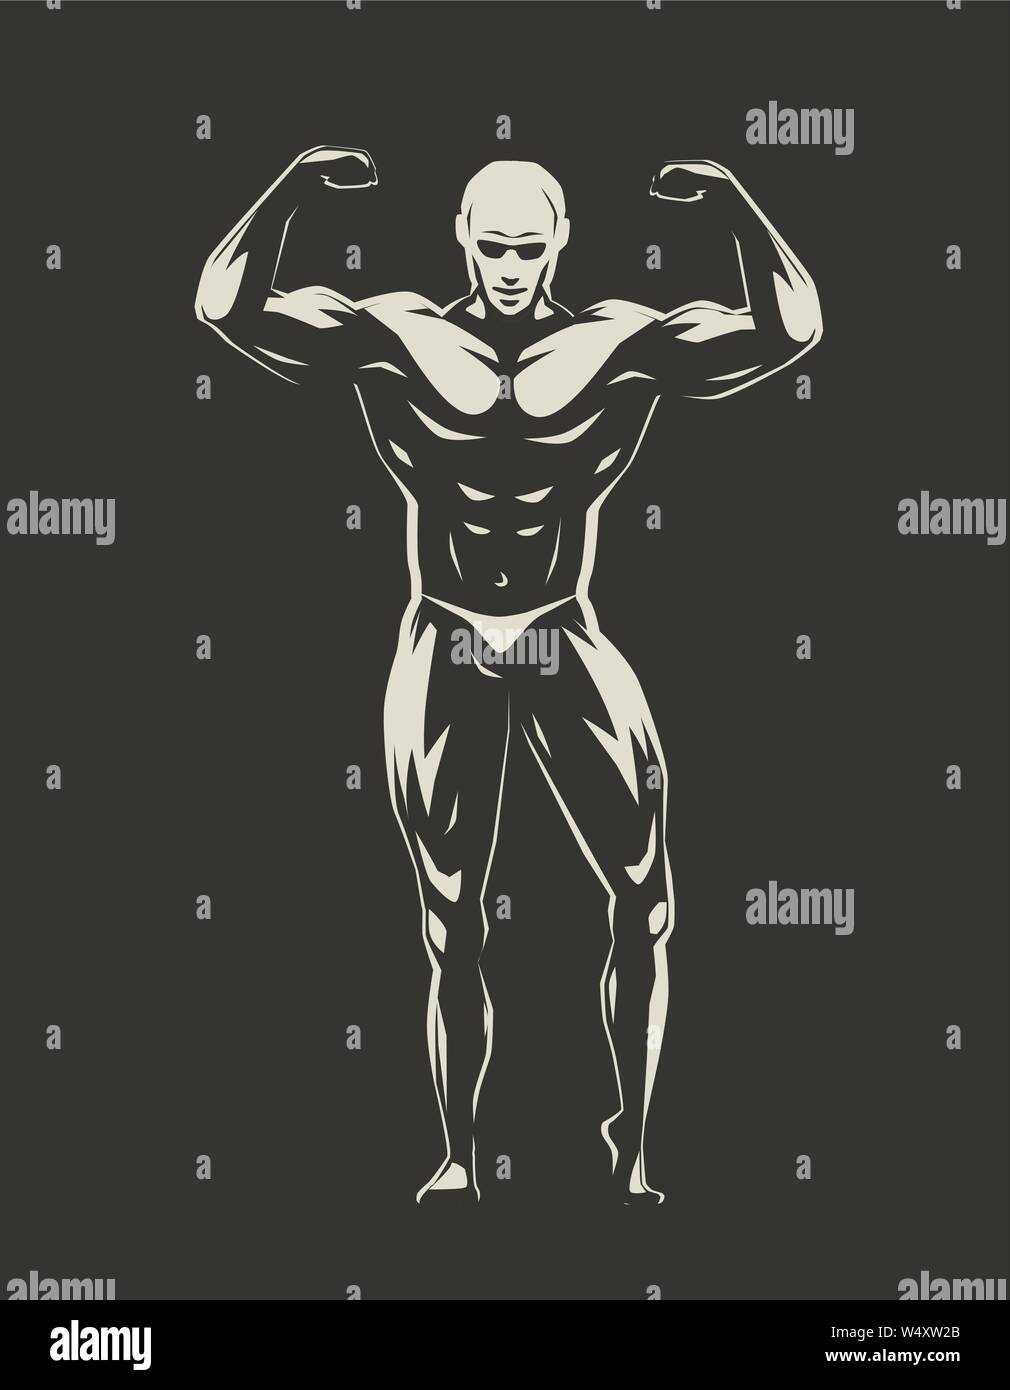 Muscular bodybuilder with hands up demonstrating strength. Gym, bodybuilding, sports concept. Vector illustration Stock Vector